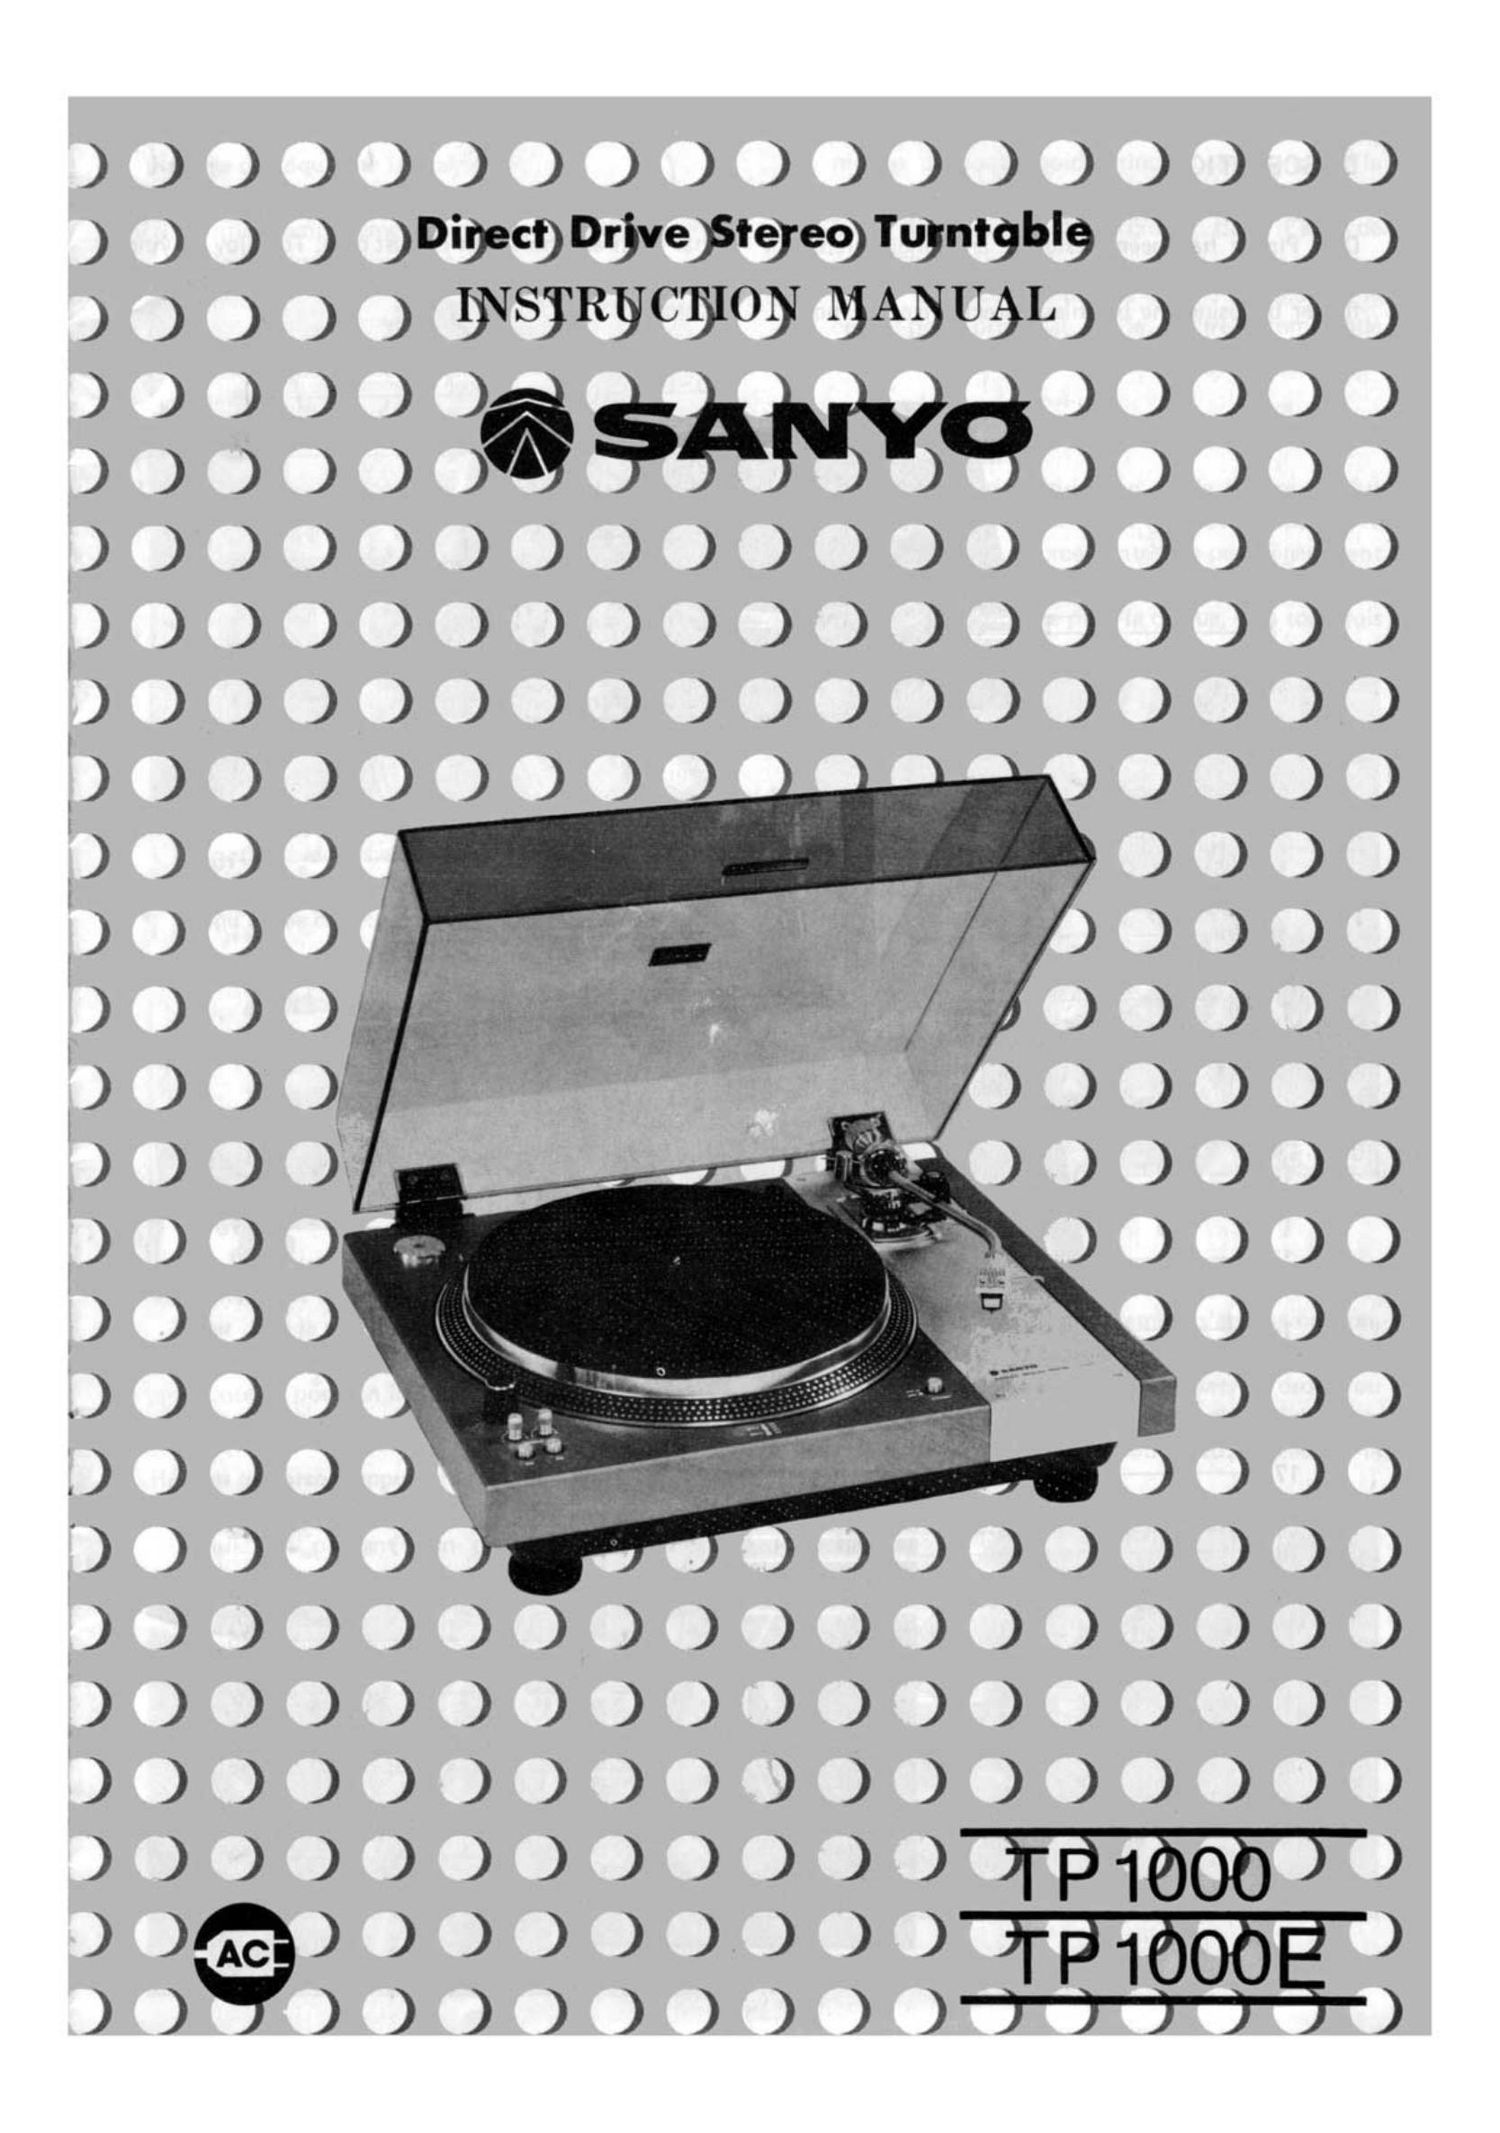 Free Download Sanyo Tp 1000 Owners Manual